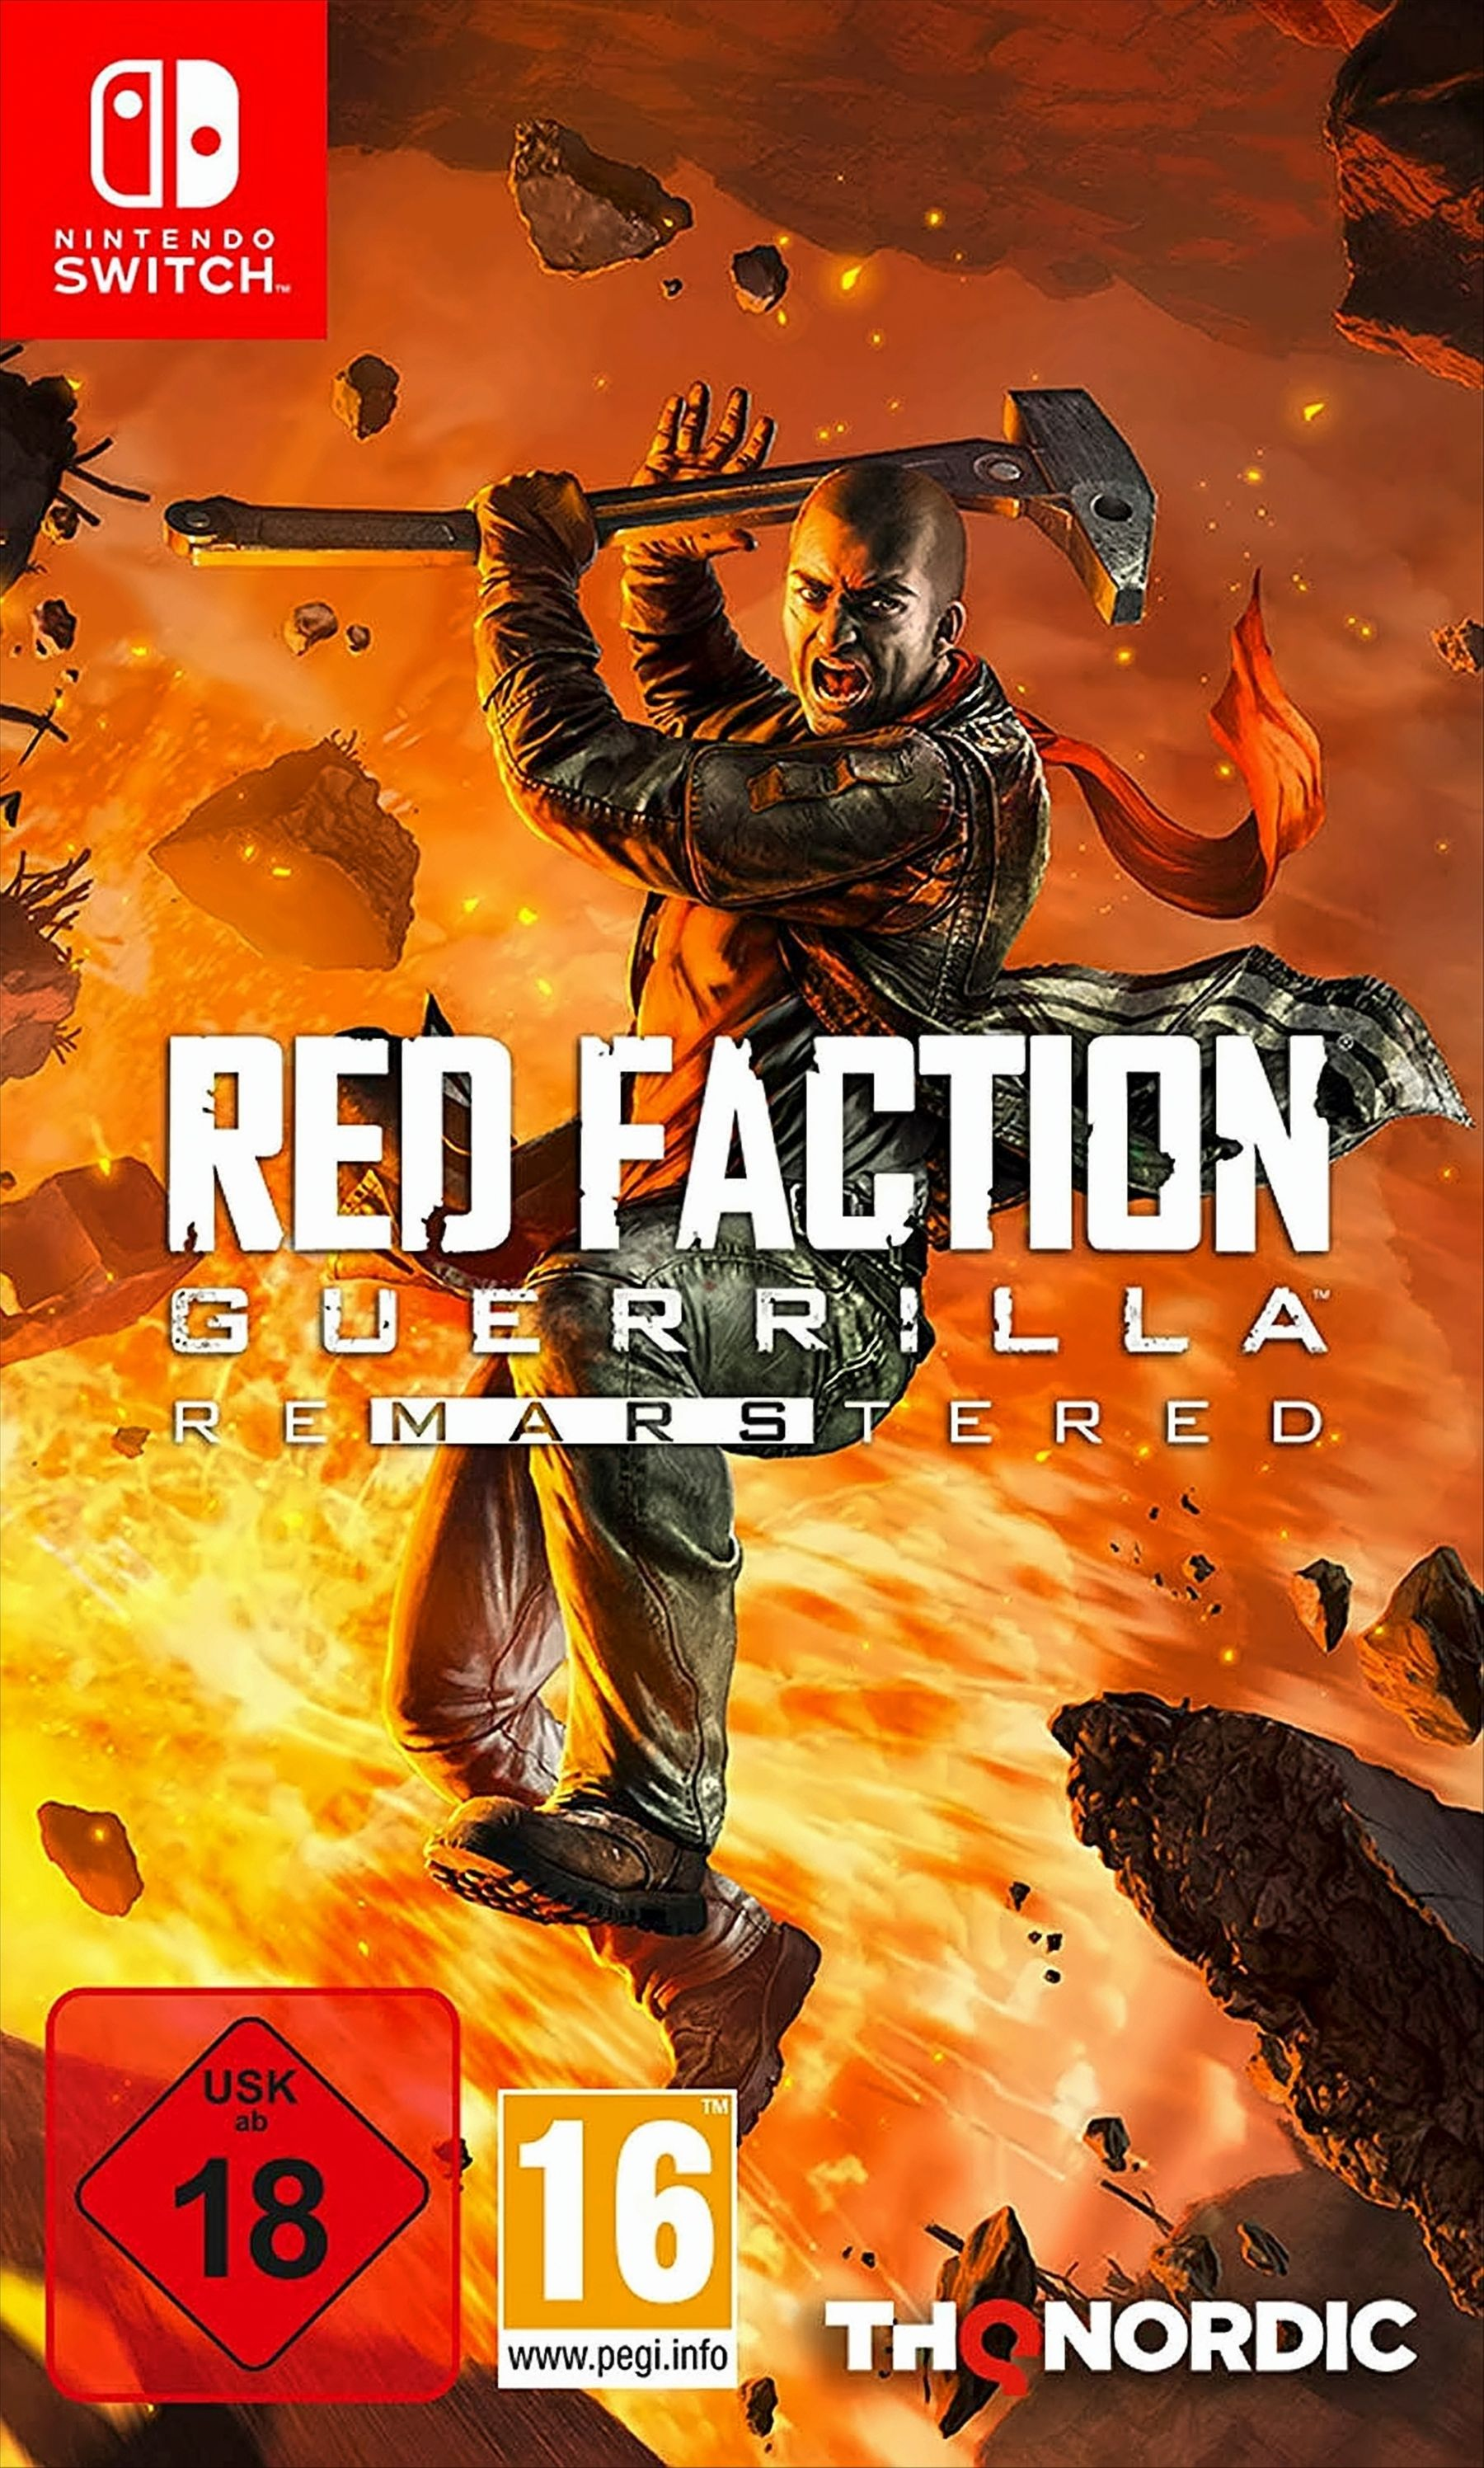 - Switch] Faction Red Guerrilla Re-mars-tered [Nintendo